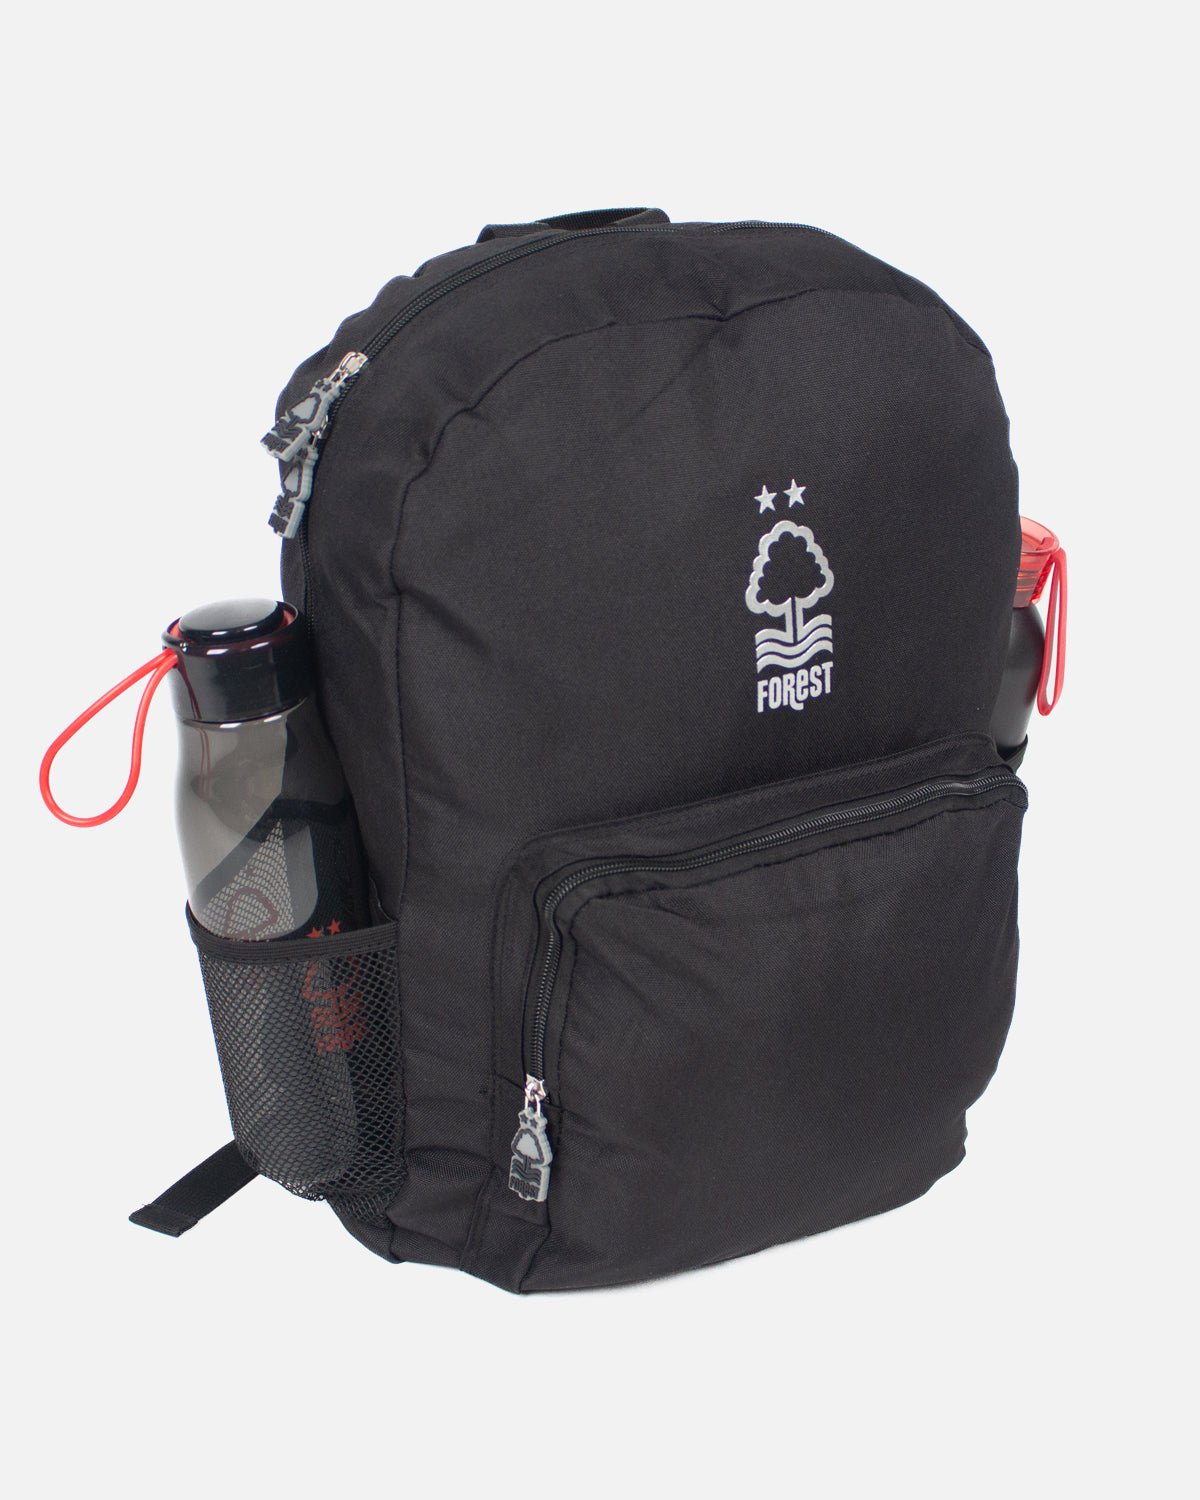 NFFC Recycled Backpack - Nottingham Forest FC